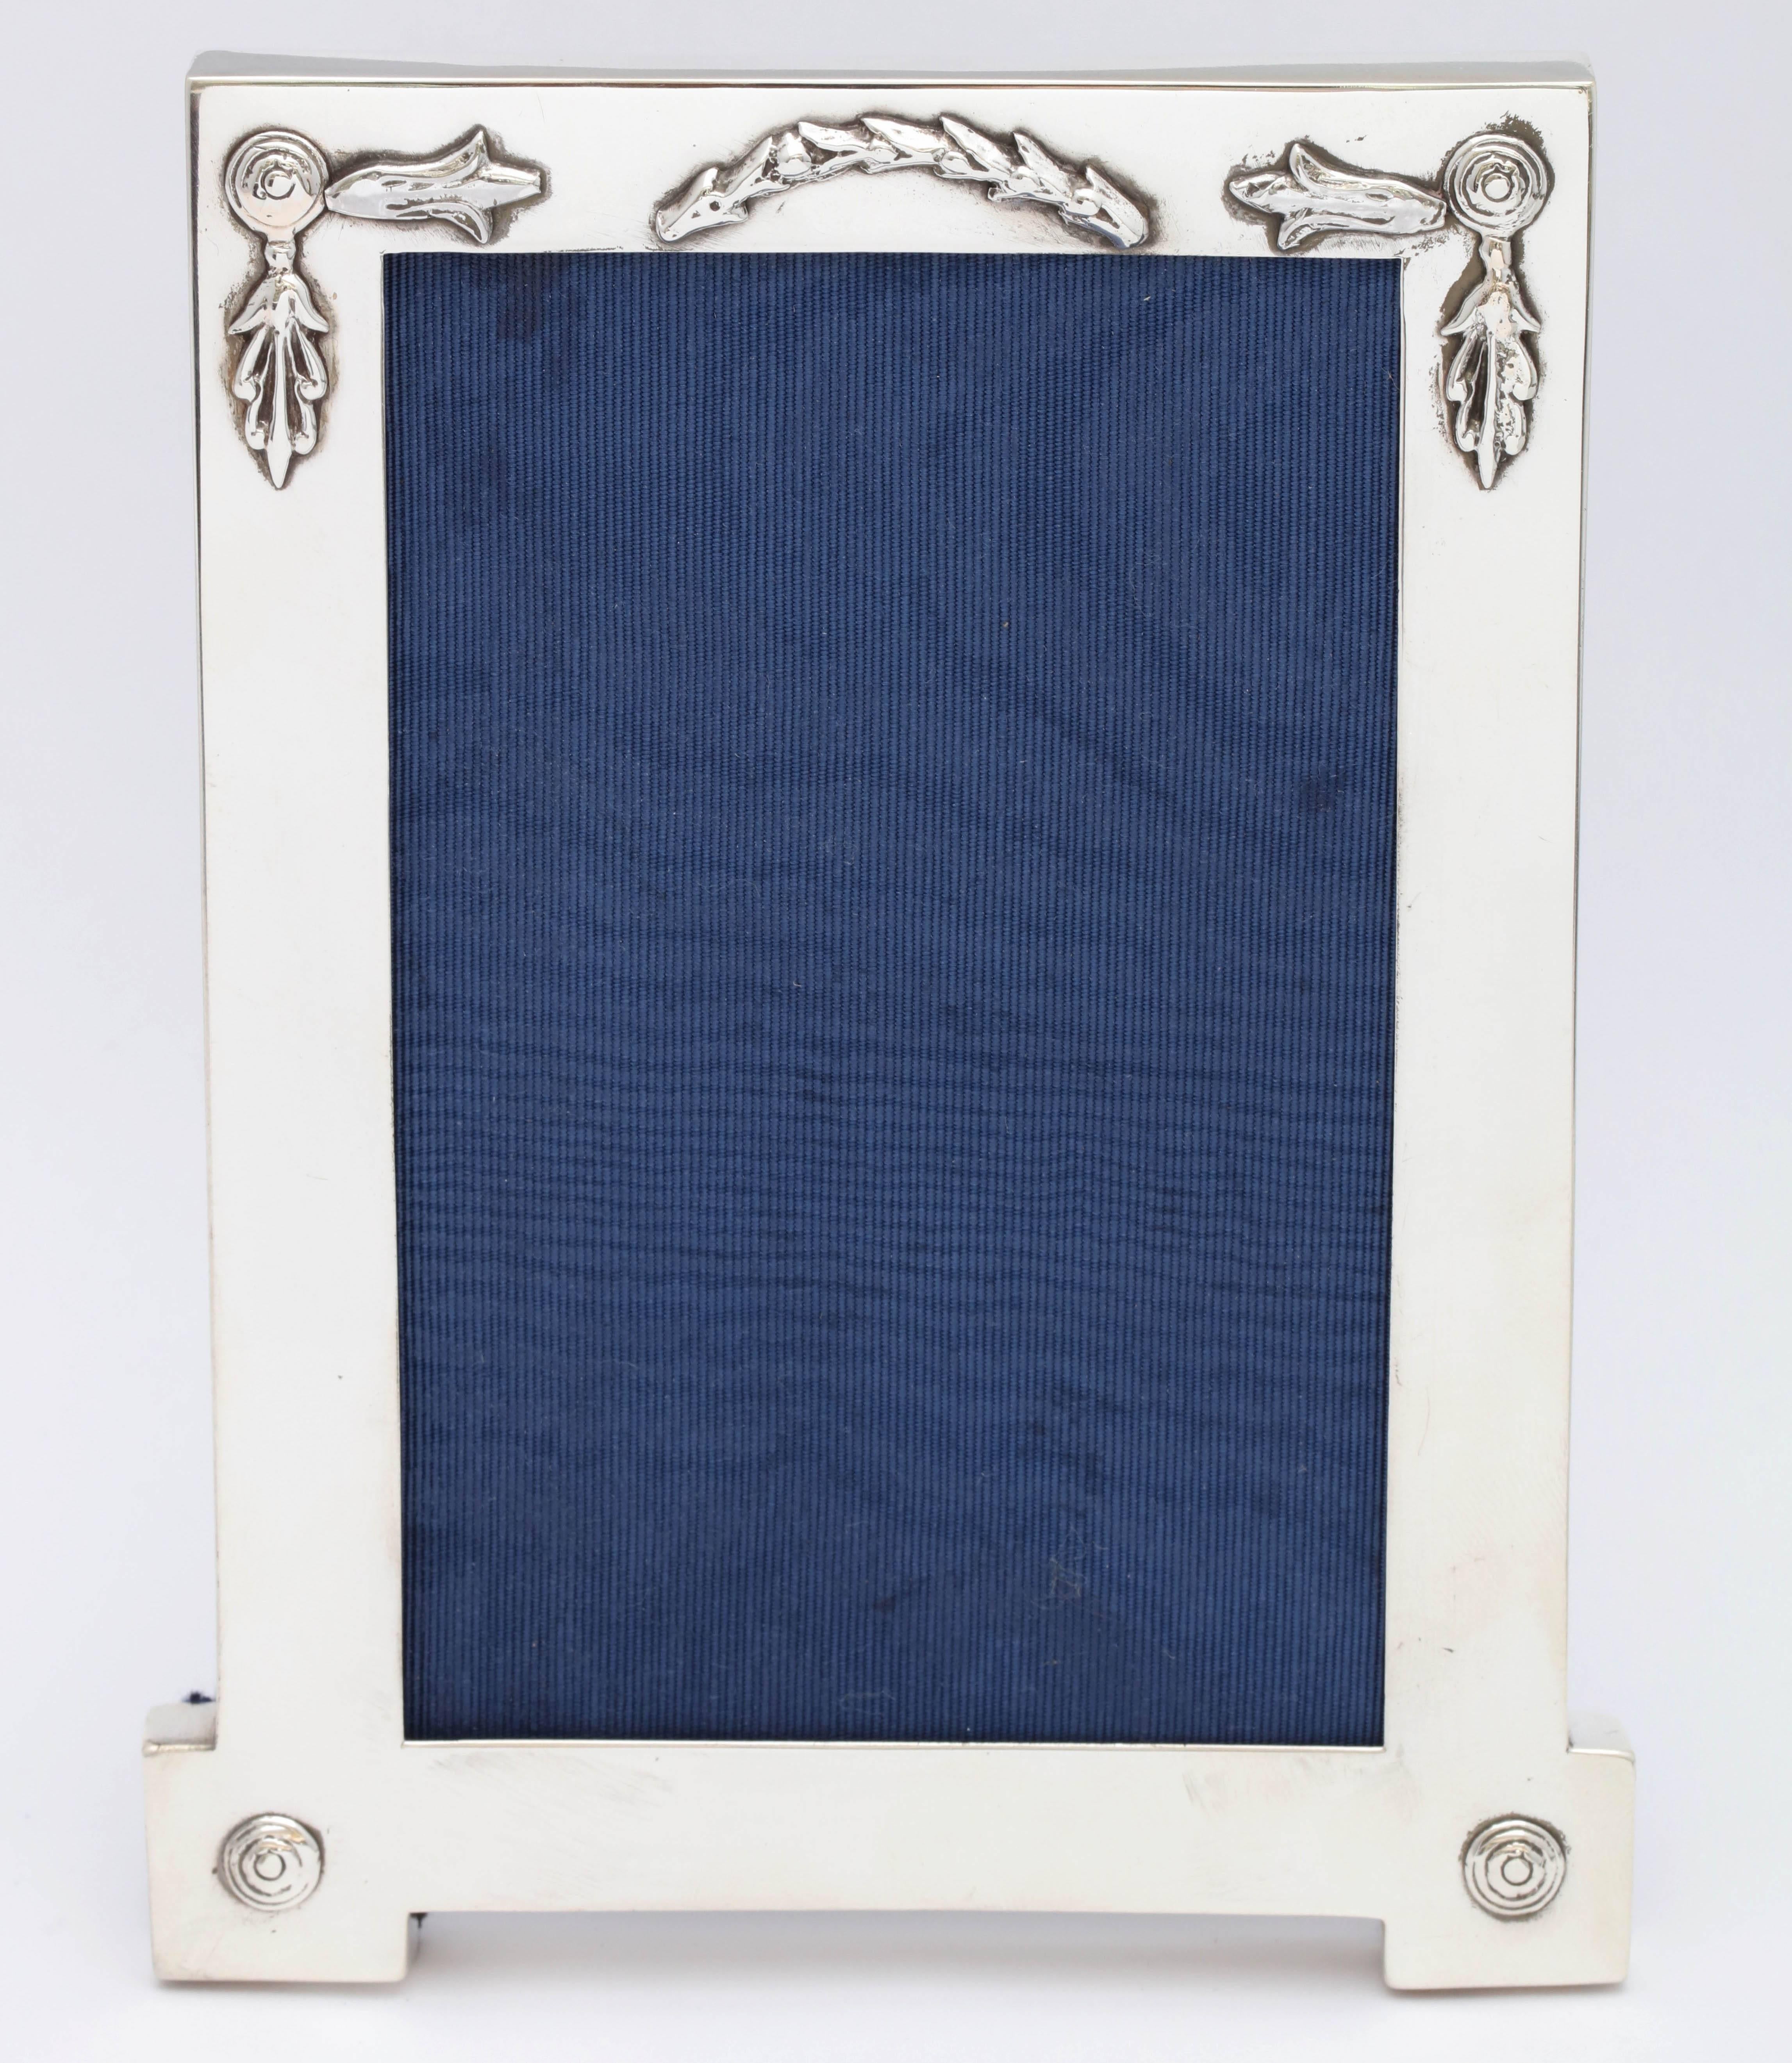 Rare, unusual, Edwardian, sterling silver, footed picture frame, London, 1909. Measures 6 1/2 inches high x 5 inches wide at widest point x 4 inches deep when easel is in open position. Holds a photo that measures 4 inches x 6 inches; window will